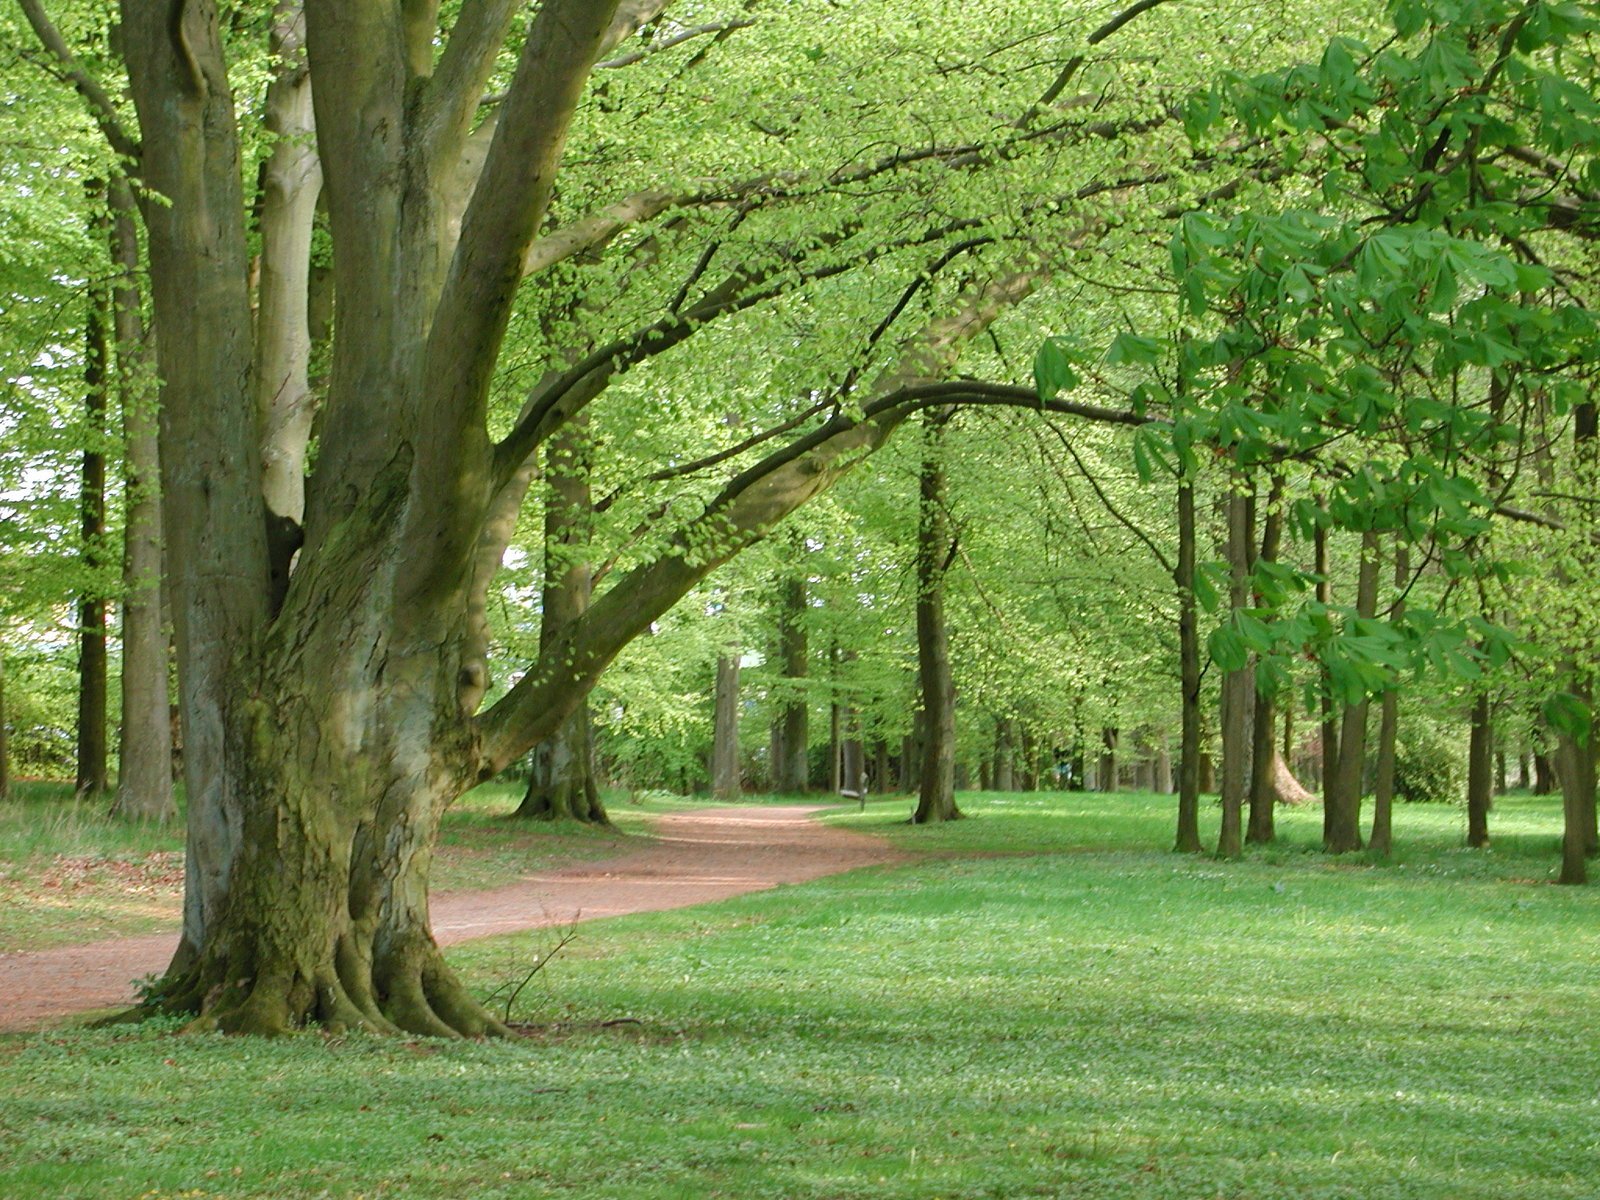 trees line a pathway between a grassy area and a forest